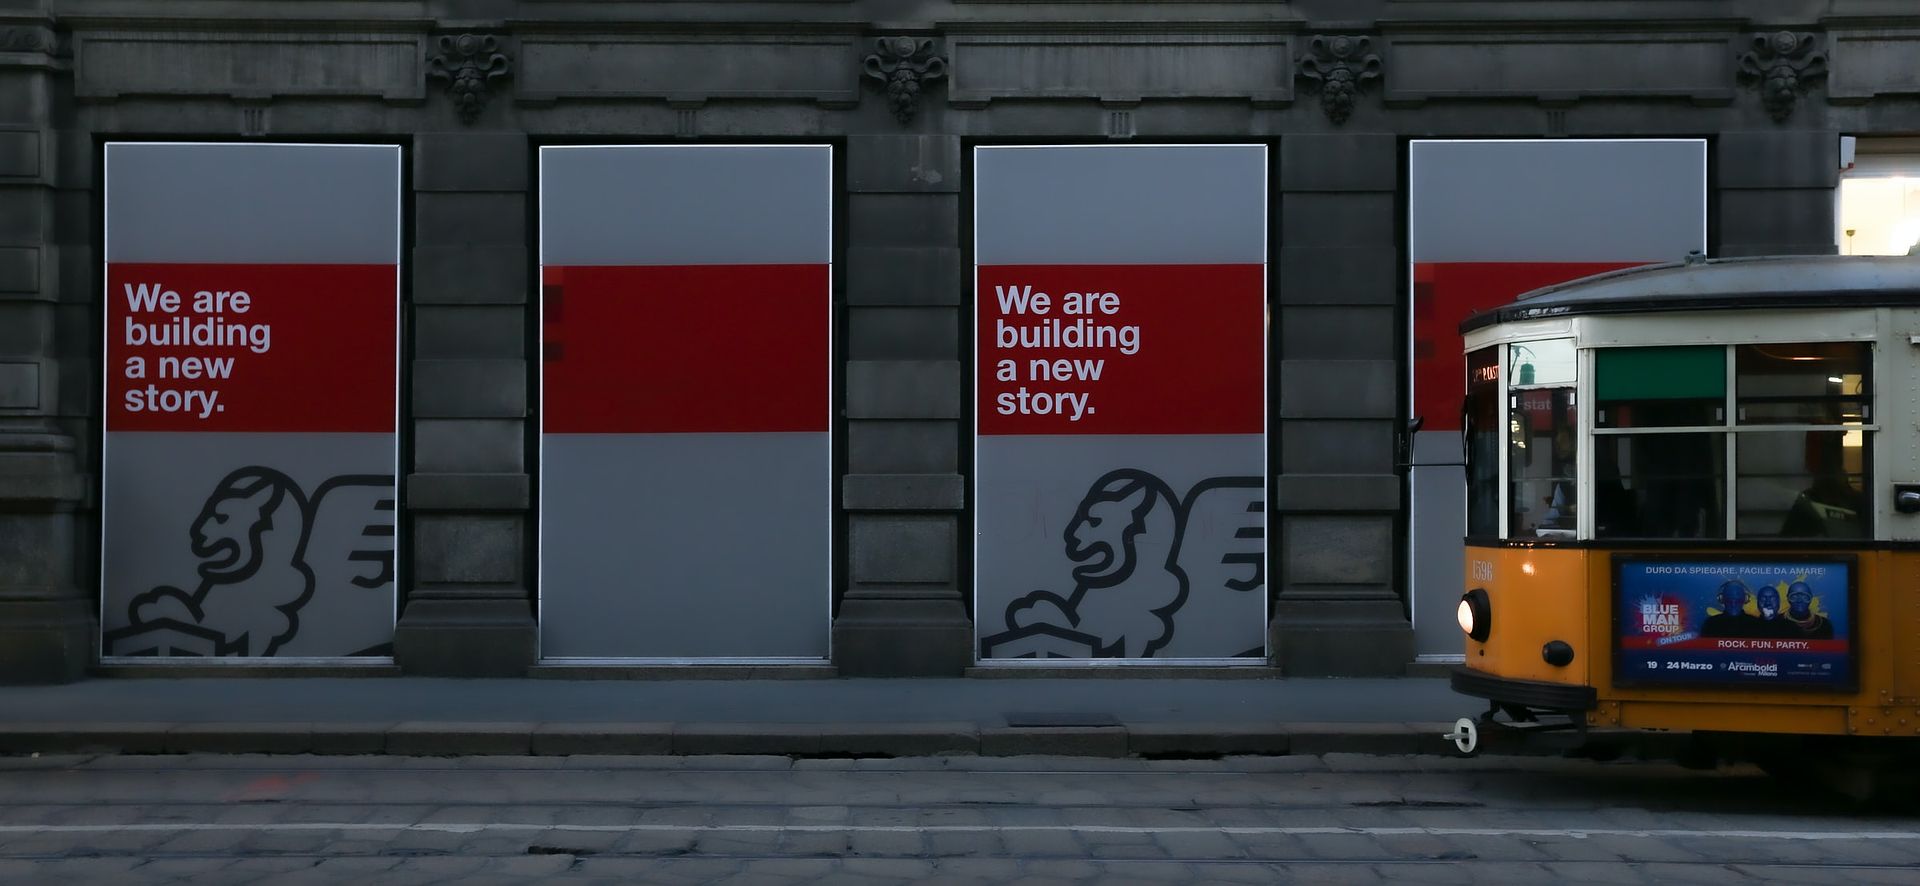 Ads: we are building a new story